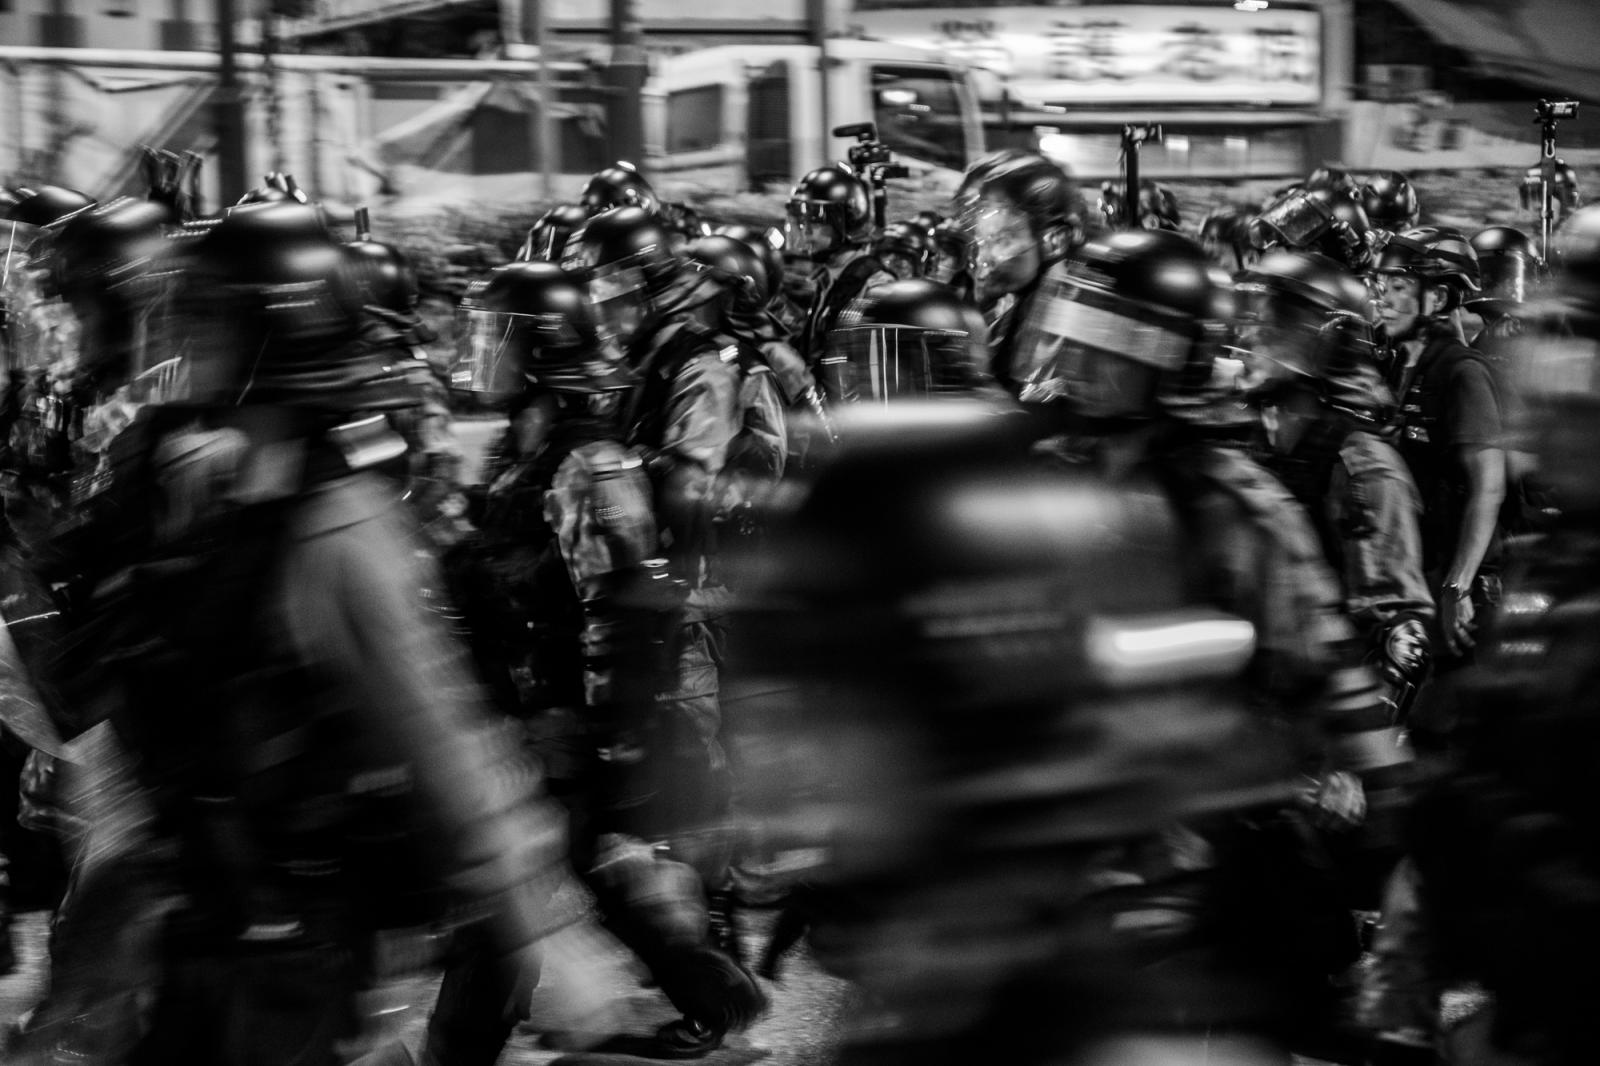 Riot police march along the streets of Hong Kong. Aug 2019.